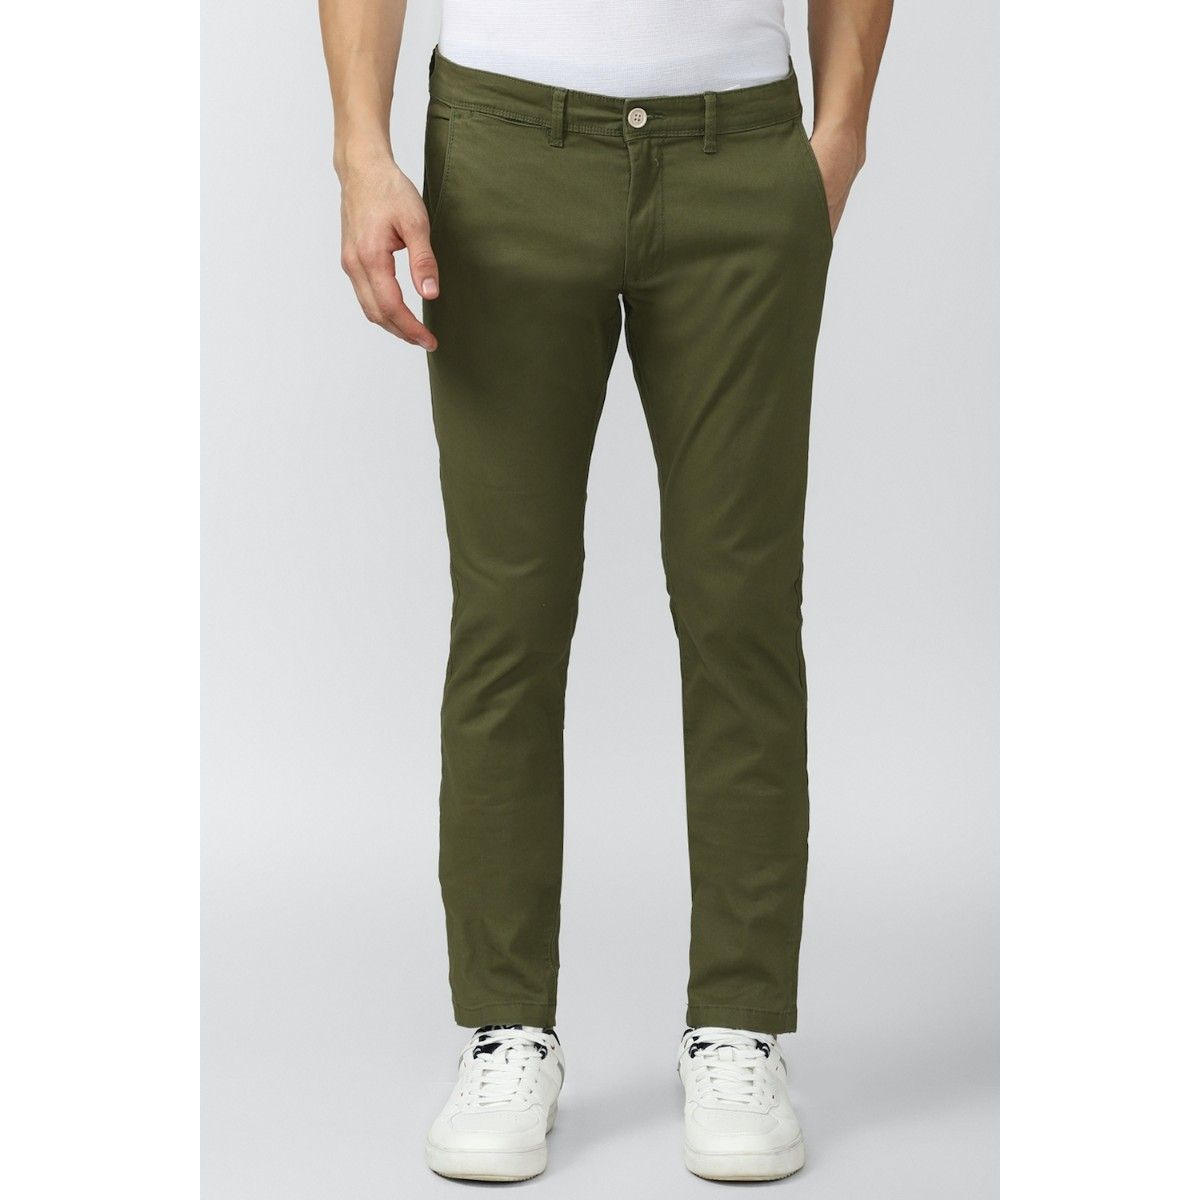 Buy Peter England Men's Casual Trousers Dark Green at Amazon.in